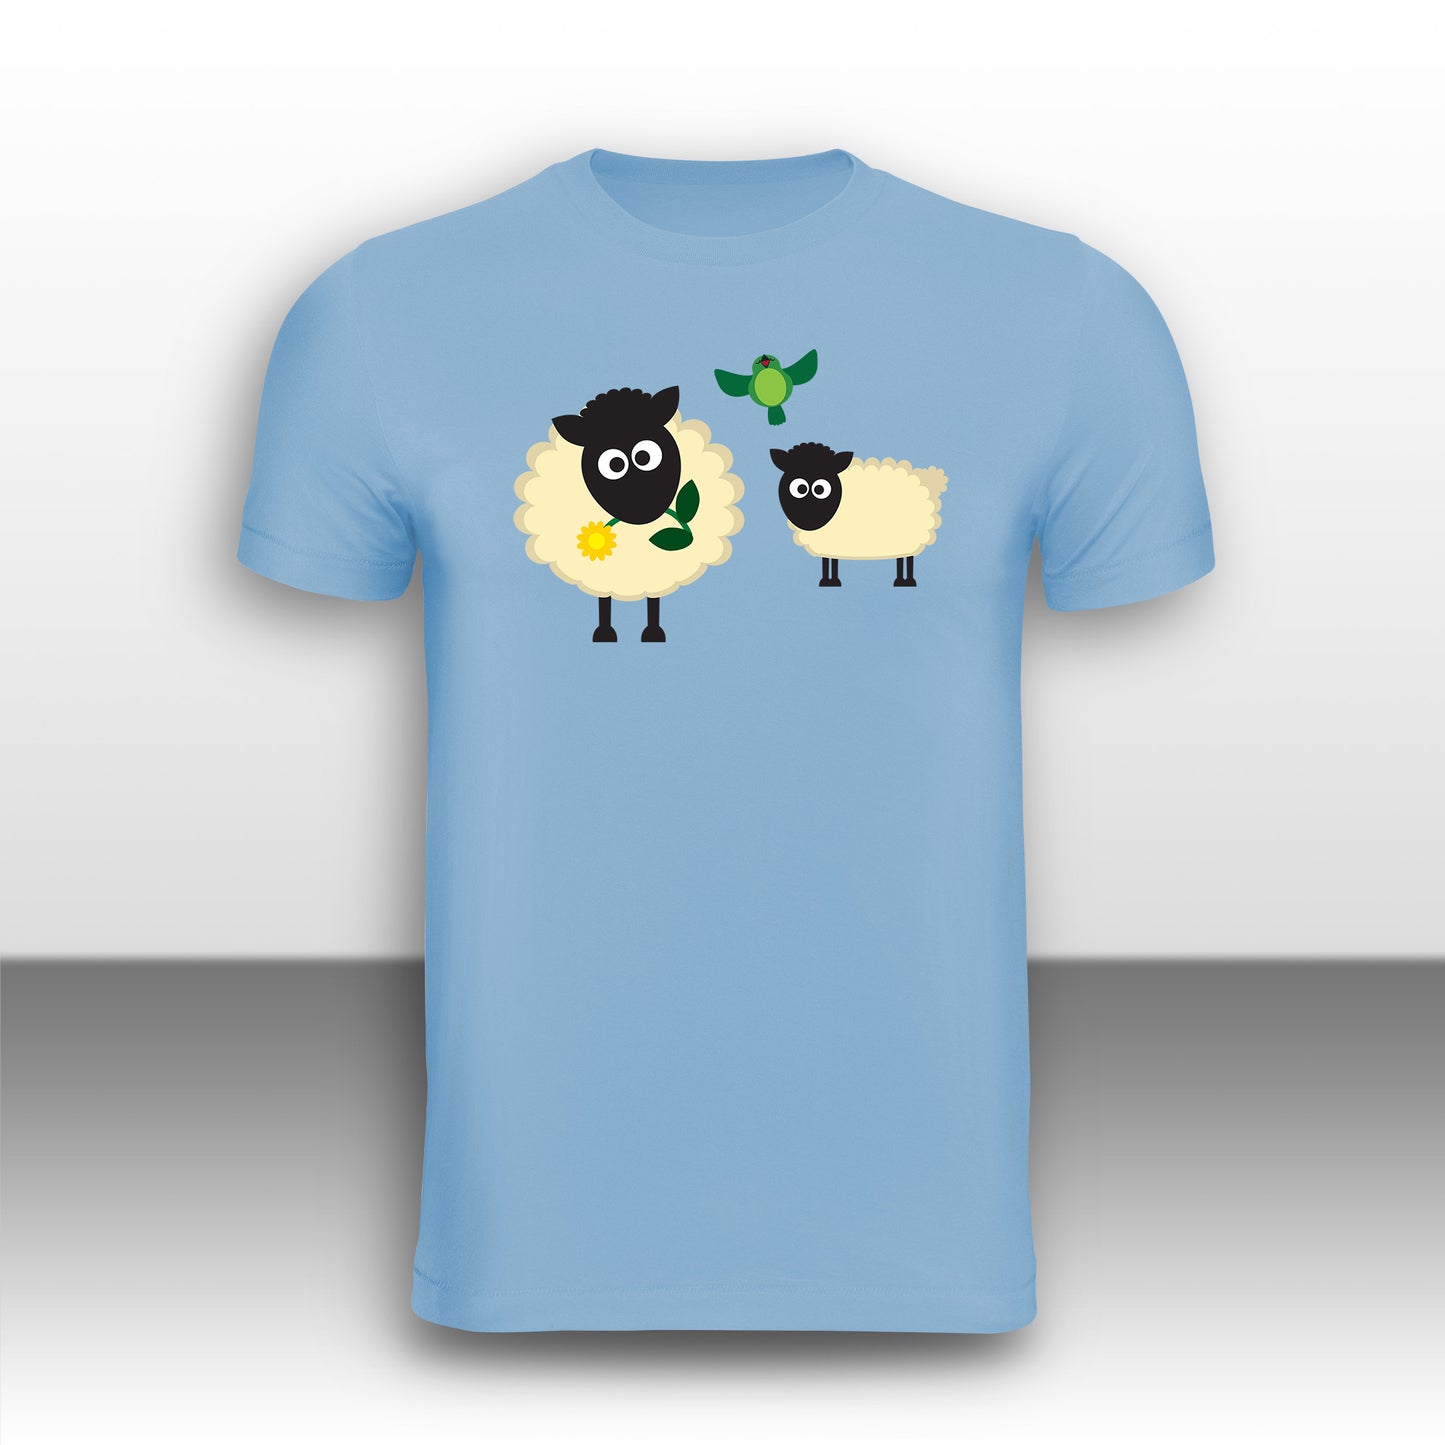 Happy Sheep Adult T-Shirt from the Farm Yard Collection